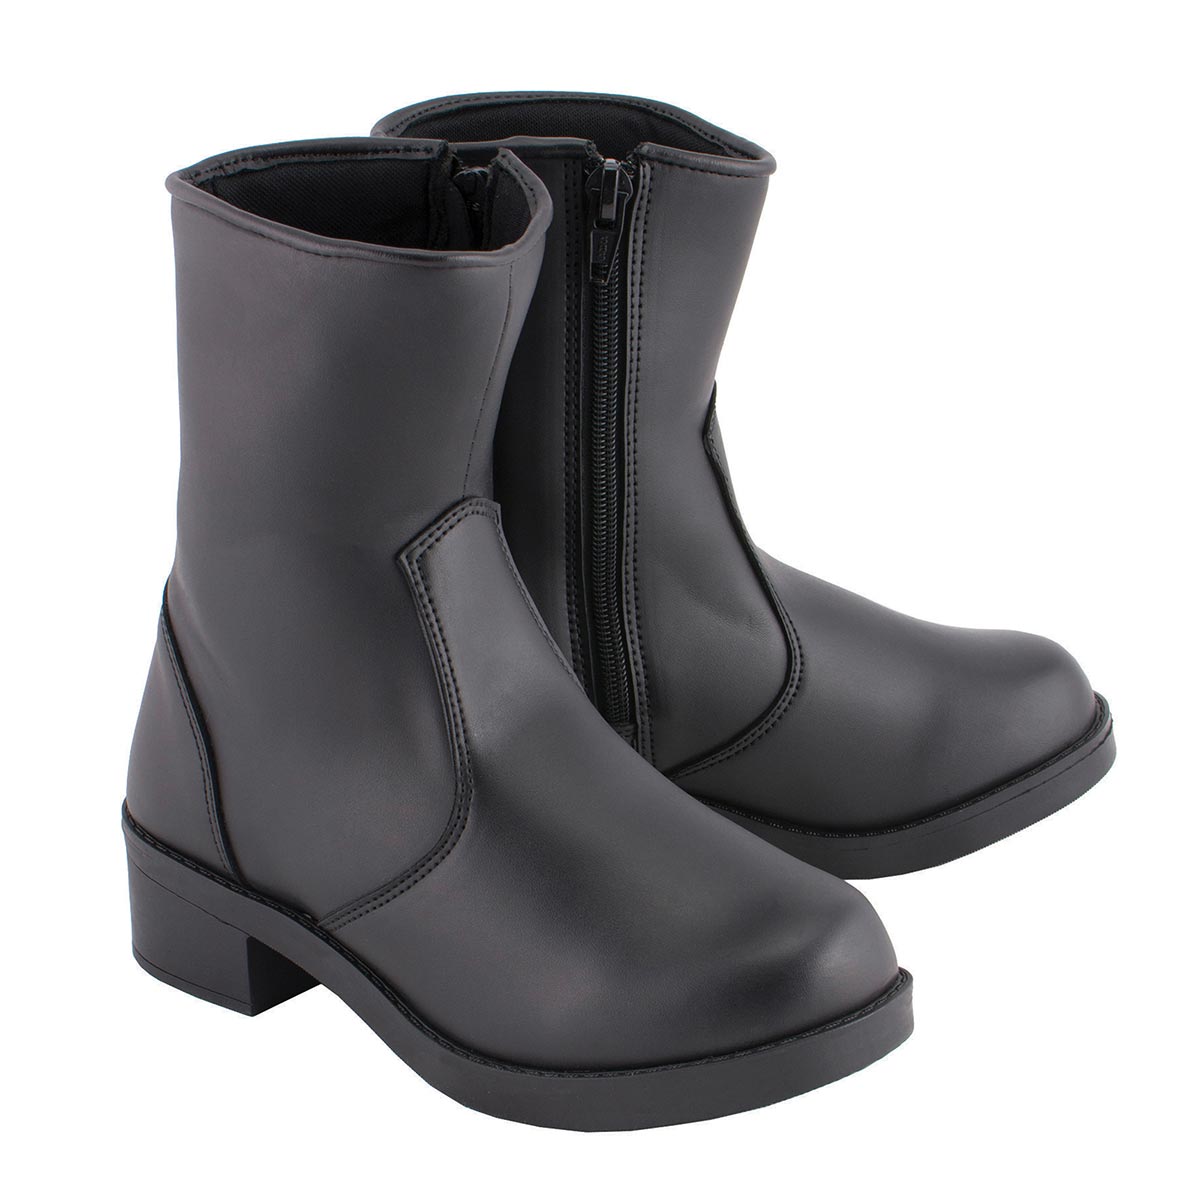 Milwaukee Leather MBL9480 Ladies Black Super Clean Riding Boots with Side Zipper Entry